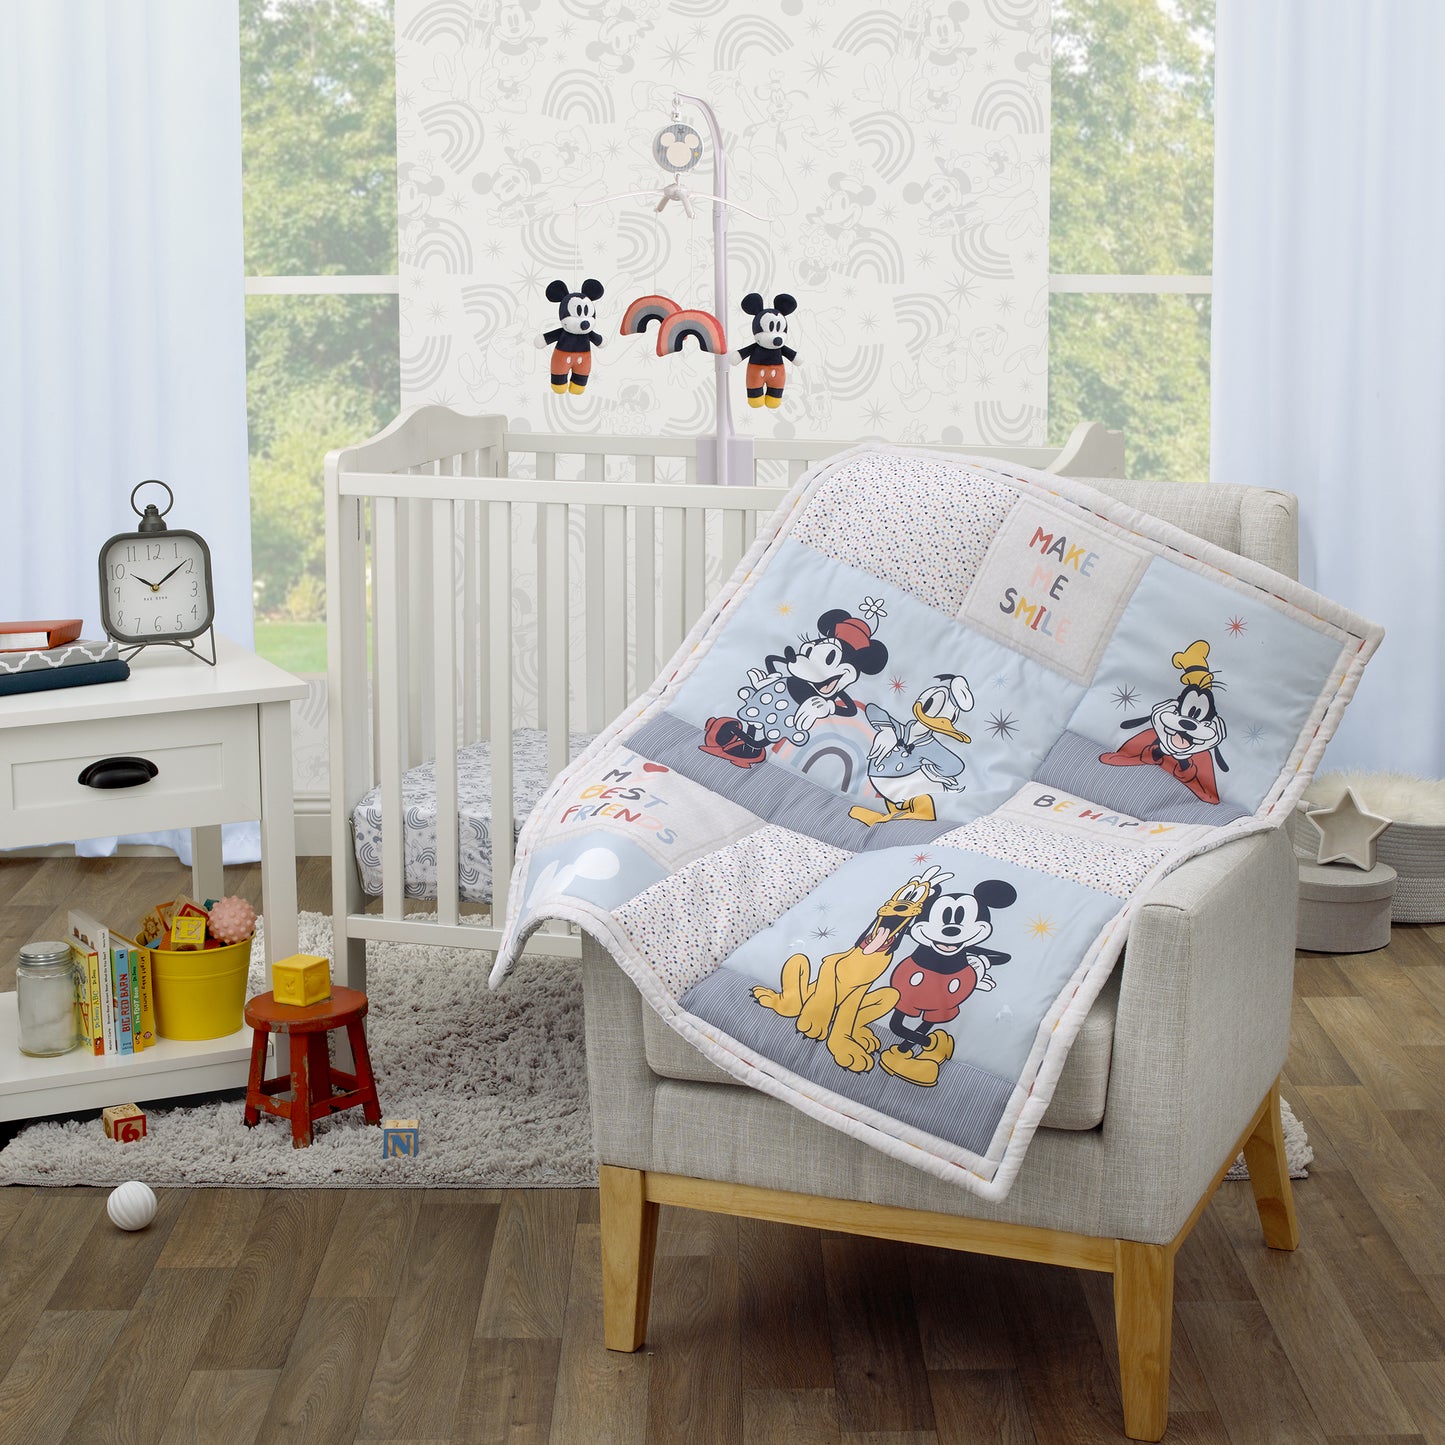 Disney Mickey and Friends Blue, Oatmeal, and Red Mickey Mouse, Minnie Mouse, Donald Duck, Pluto and Goofy 3 Piece Nursery Mini Crib Bedding Set - Comforter and Two Fitted Mini Crib Sheets